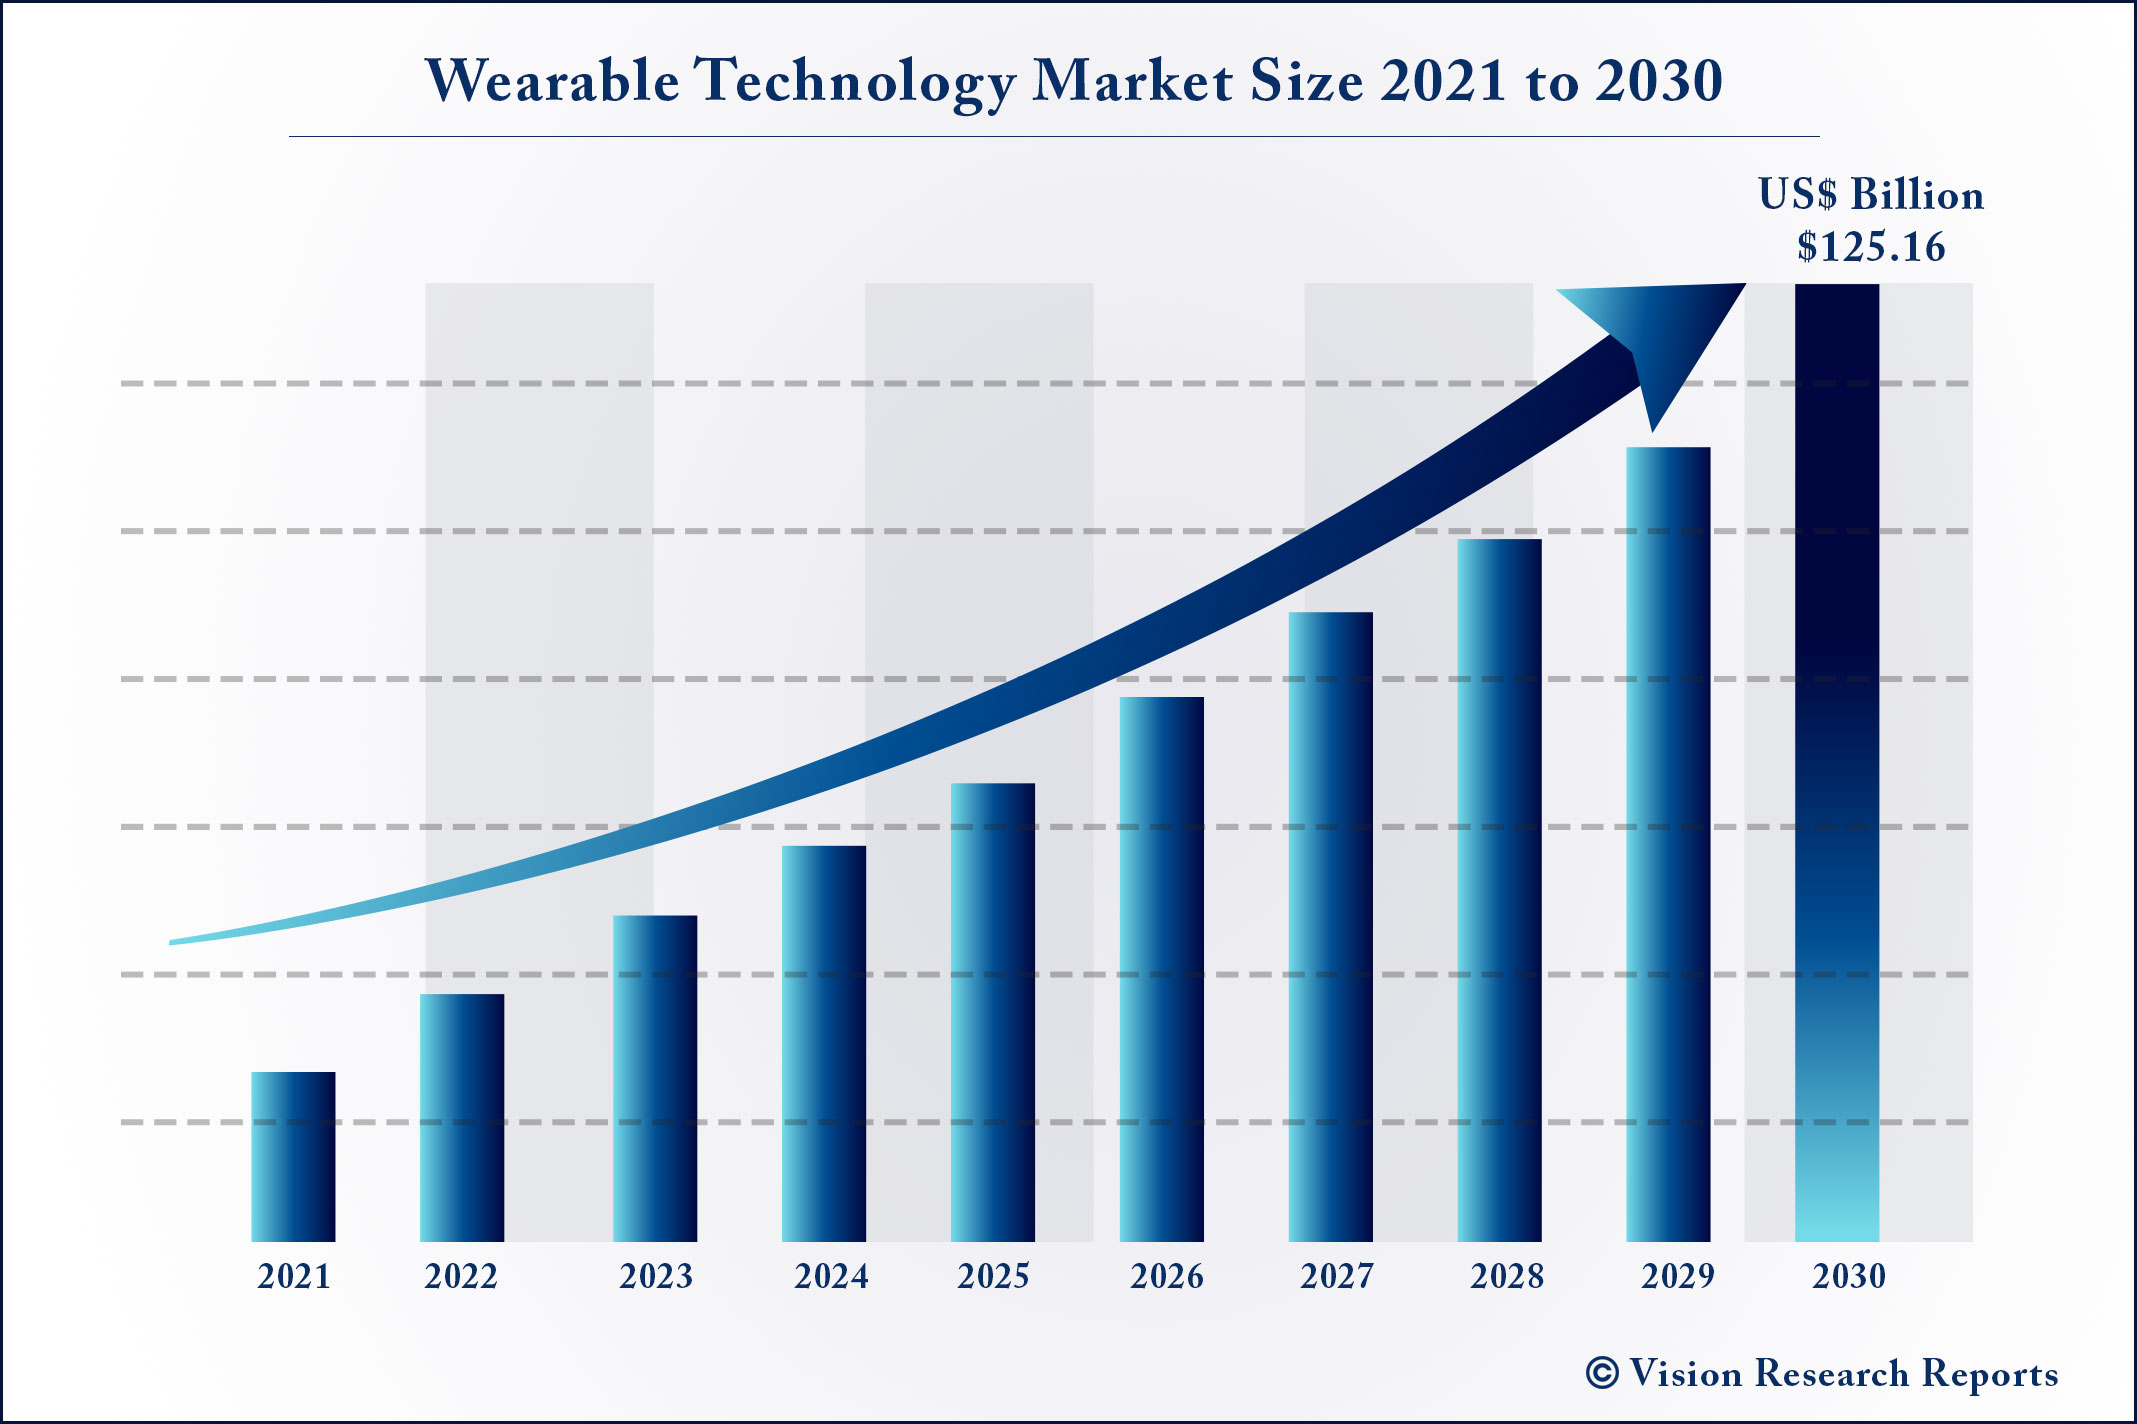 Wearable Technology Market Size 2021 to 2030